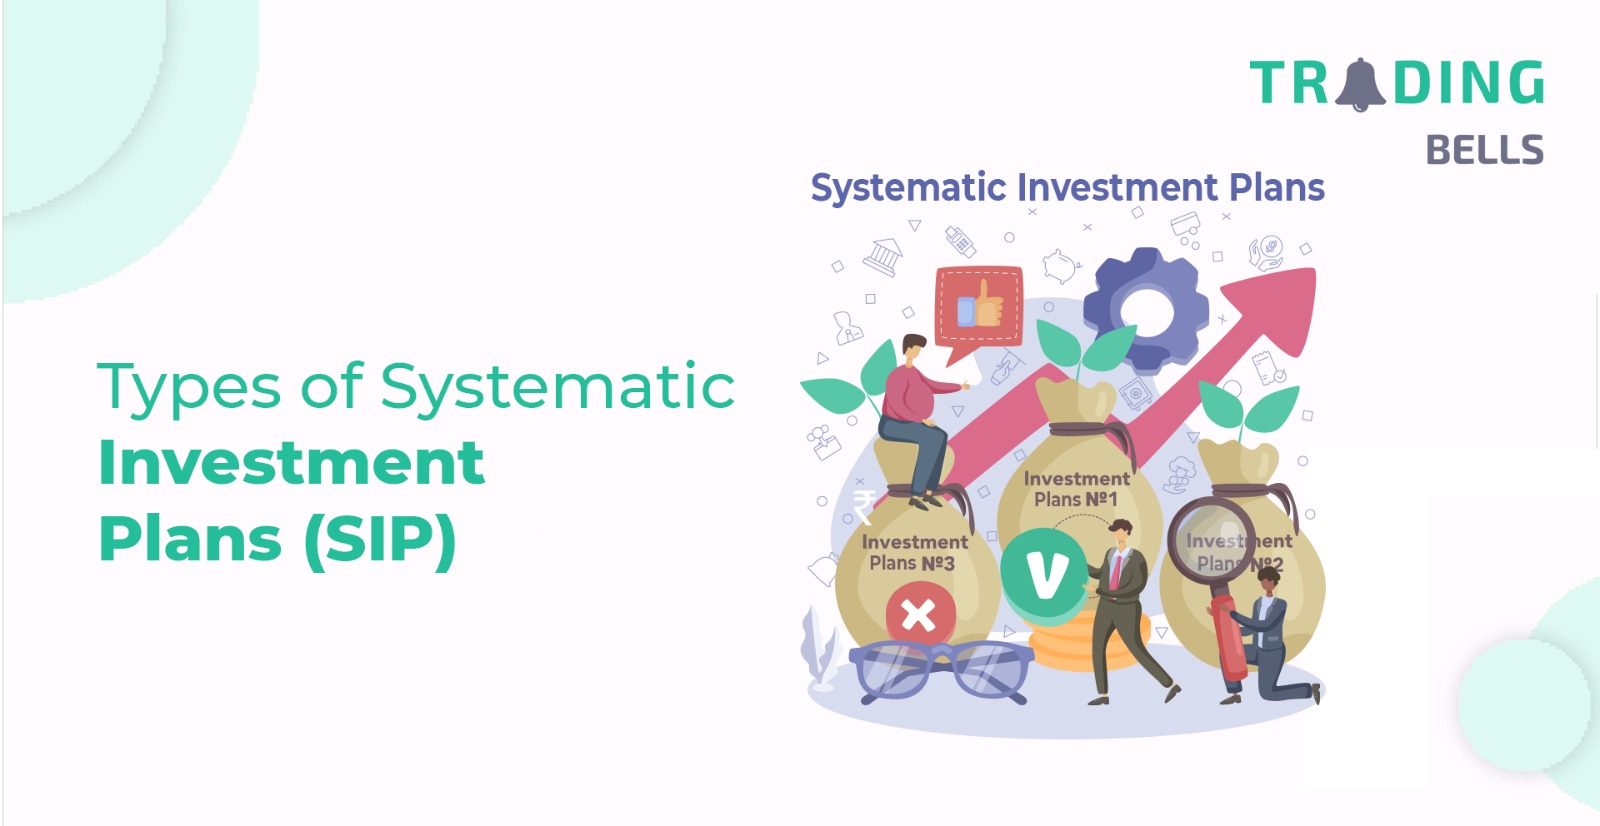 Types of Systematic Investment Plans (SIPs)